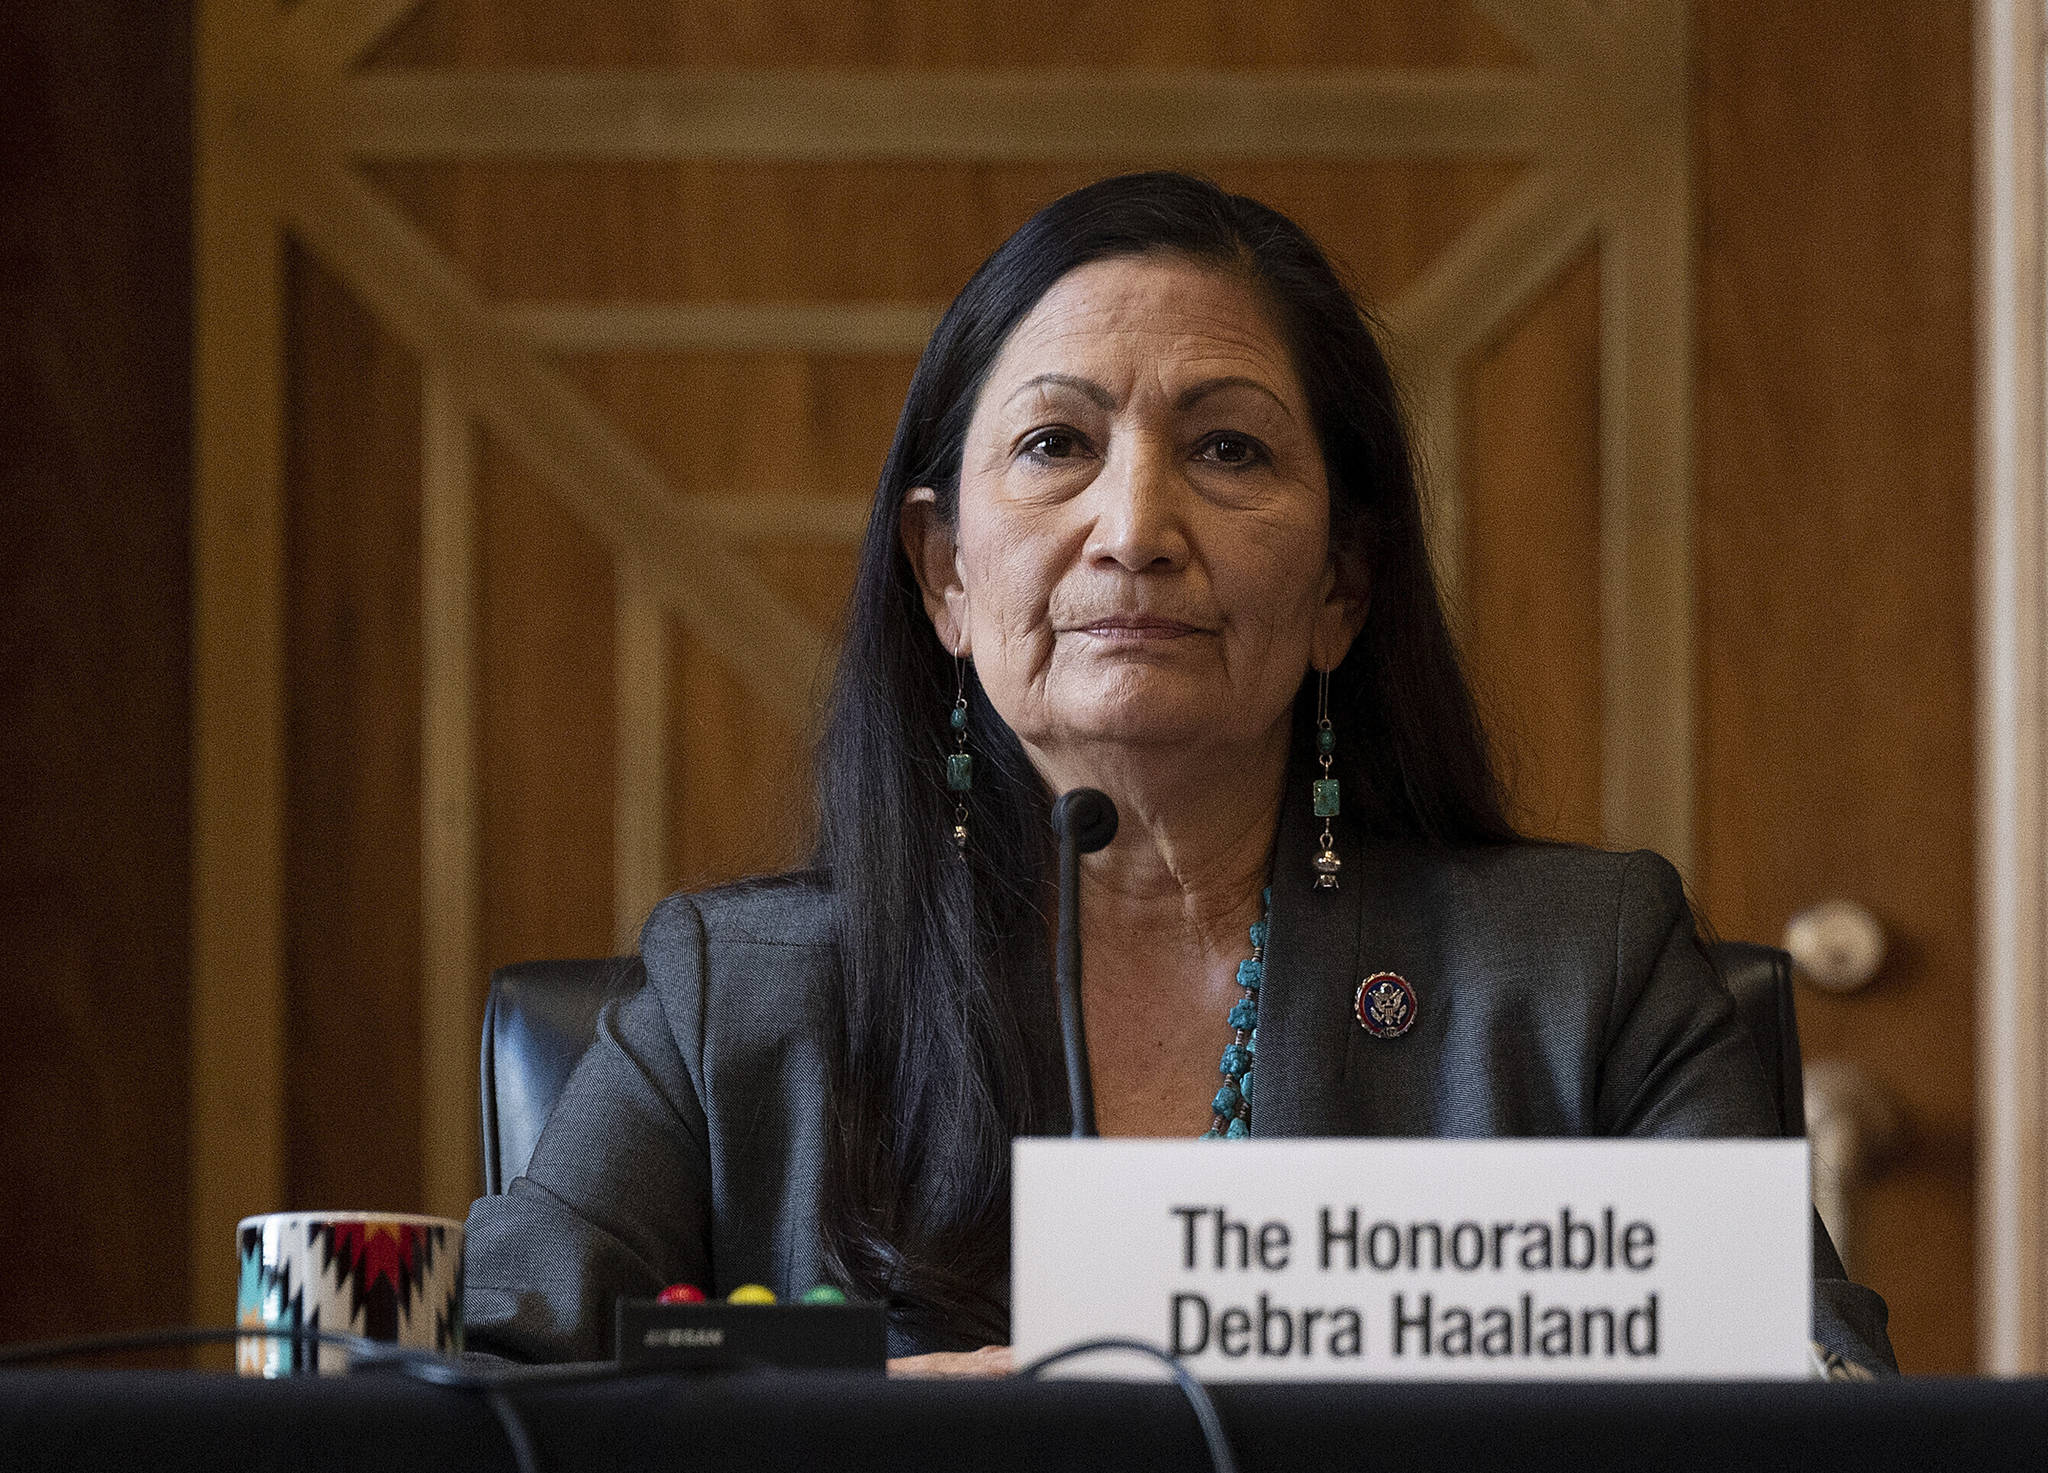 Jim Watson / Pool Photo
Rep. Deb Haaland, D-N.M., listens during the Senate Committee on Energy and Natural Resources hearing on her nomination to be Interior secretary, on Capitol Hill in Washington. Some Republican senators labeled Haaland “radical” over her calls to reduce dependence on fossil fuels and address climate change, and said that could hurt rural America and major oil and gas-producing states. The label of Haaland as a “radical” by Republican lawmakers is getting pushback from Native Americans.